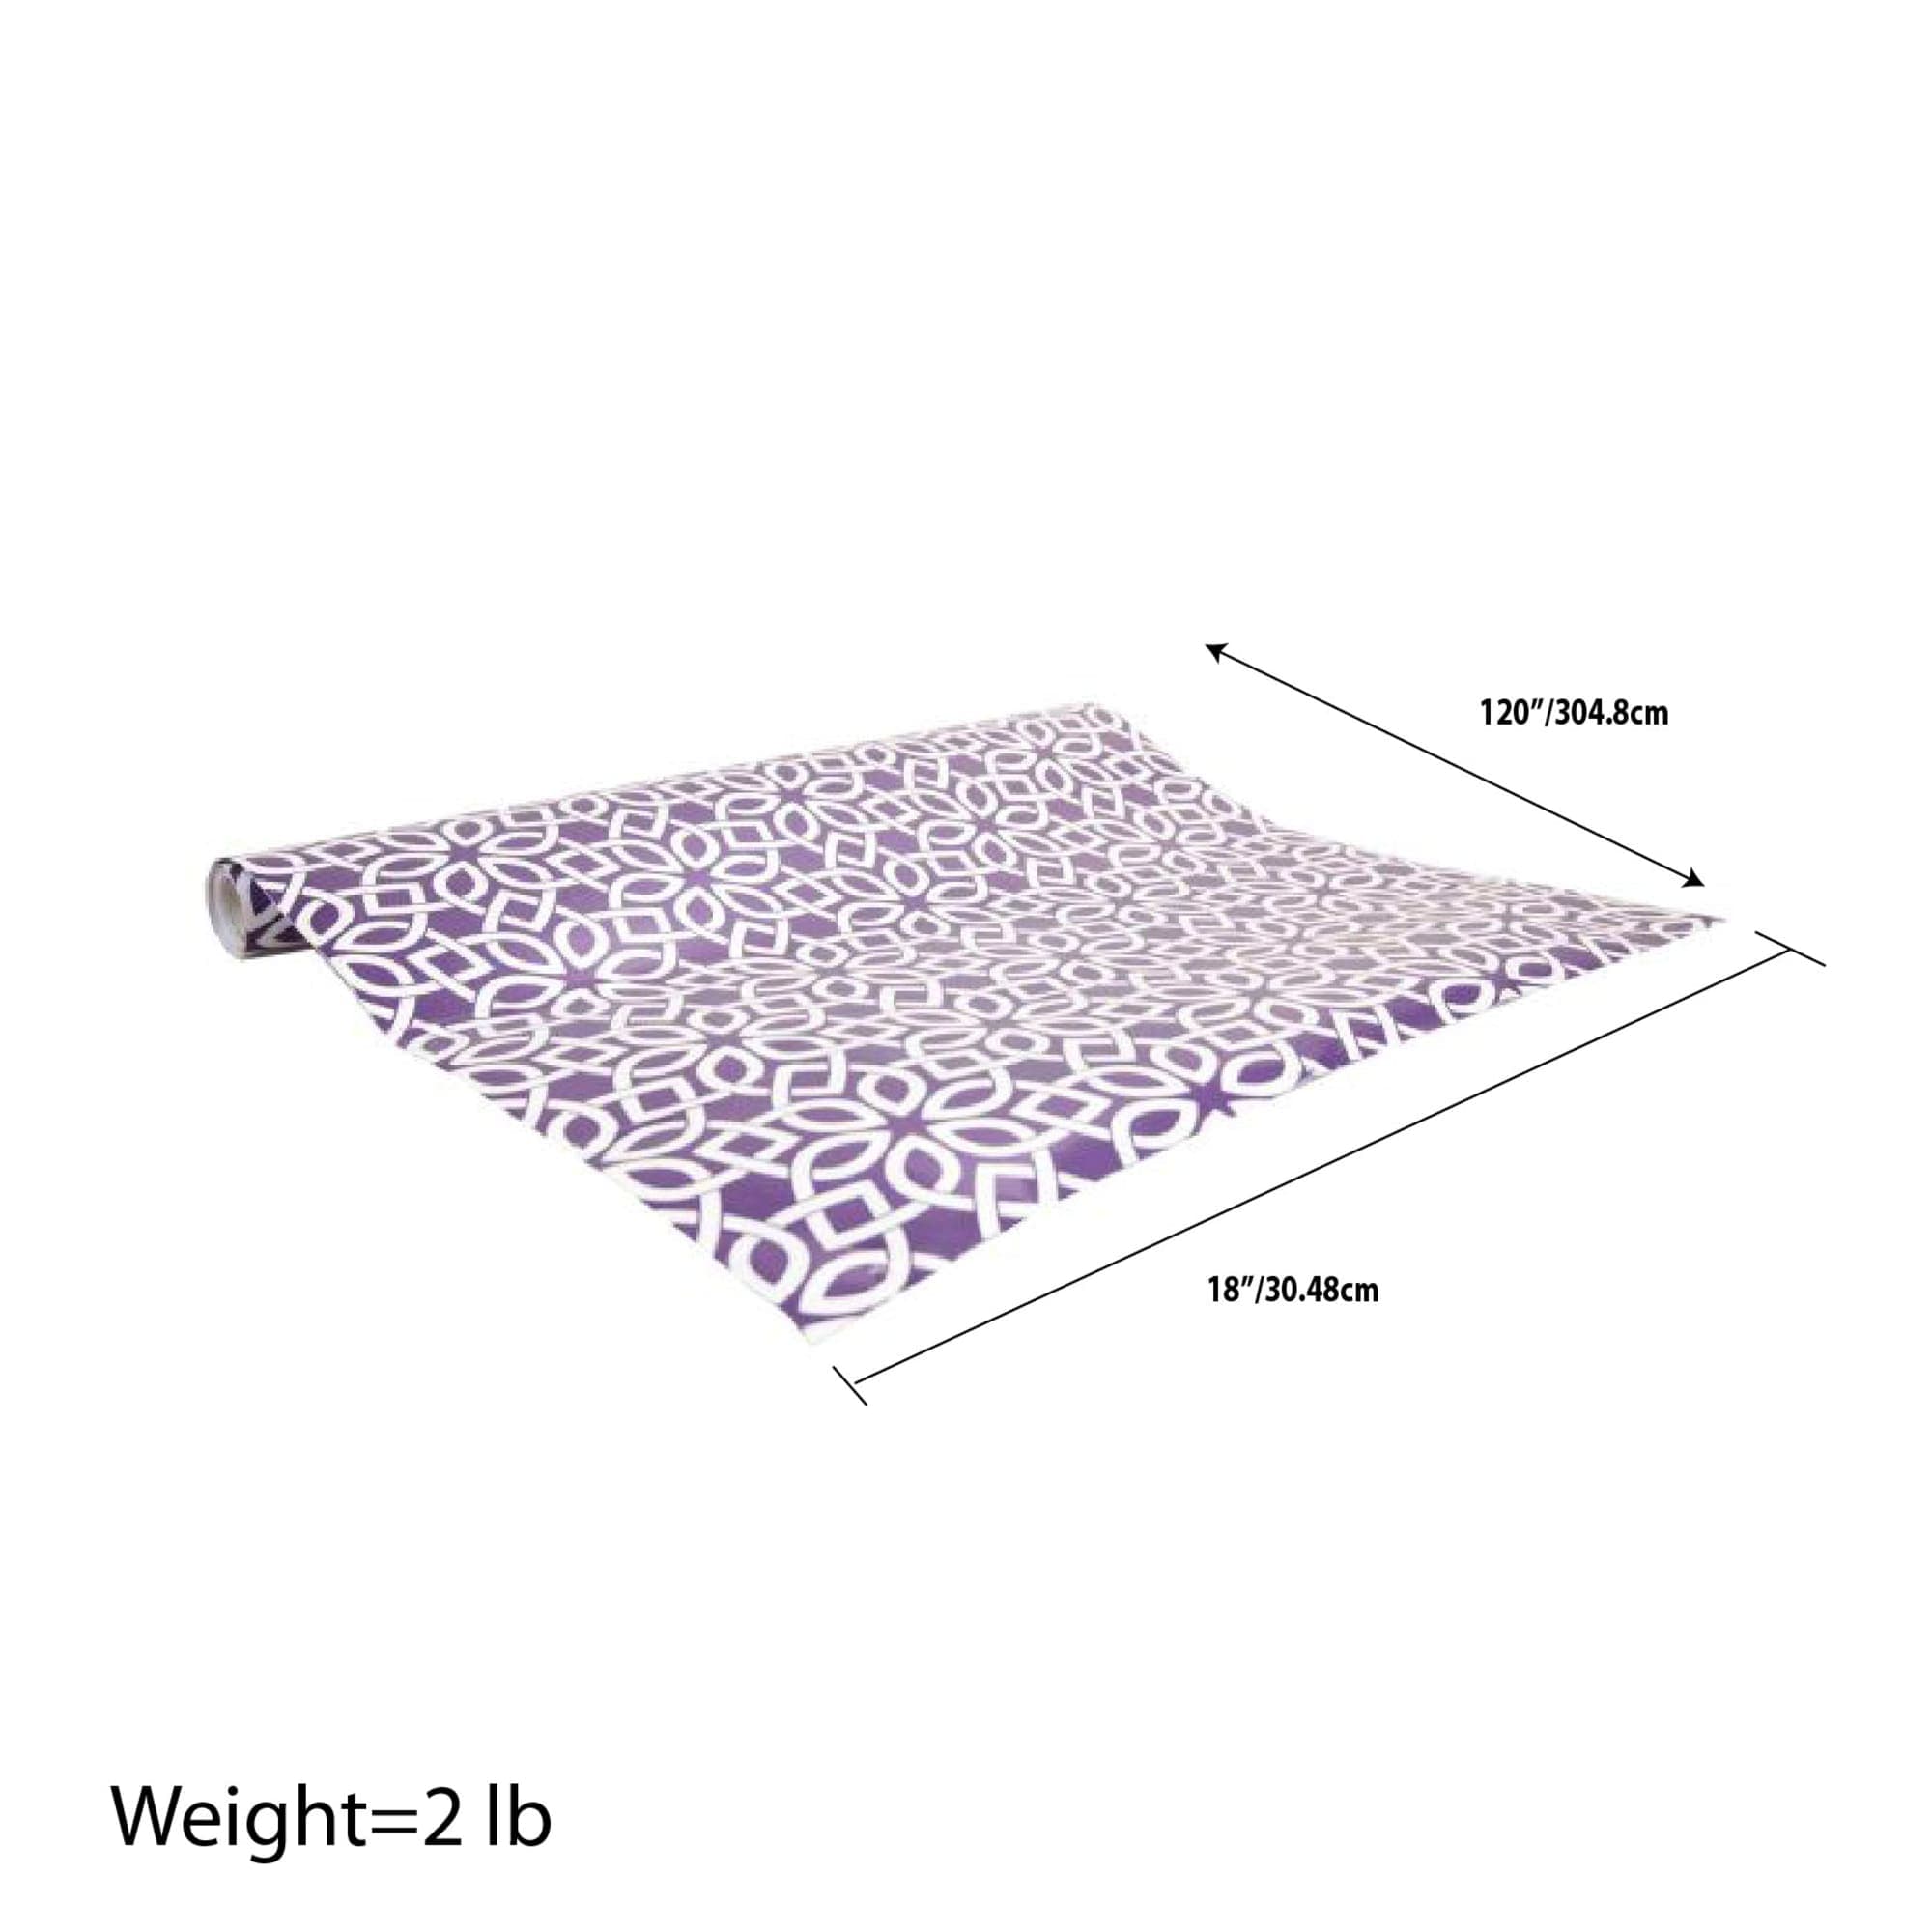 Home Basics Adhesive Blossom Shelf Liner, (Pack of 2), Purple $5.00 EACH, CASE PACK OF 12